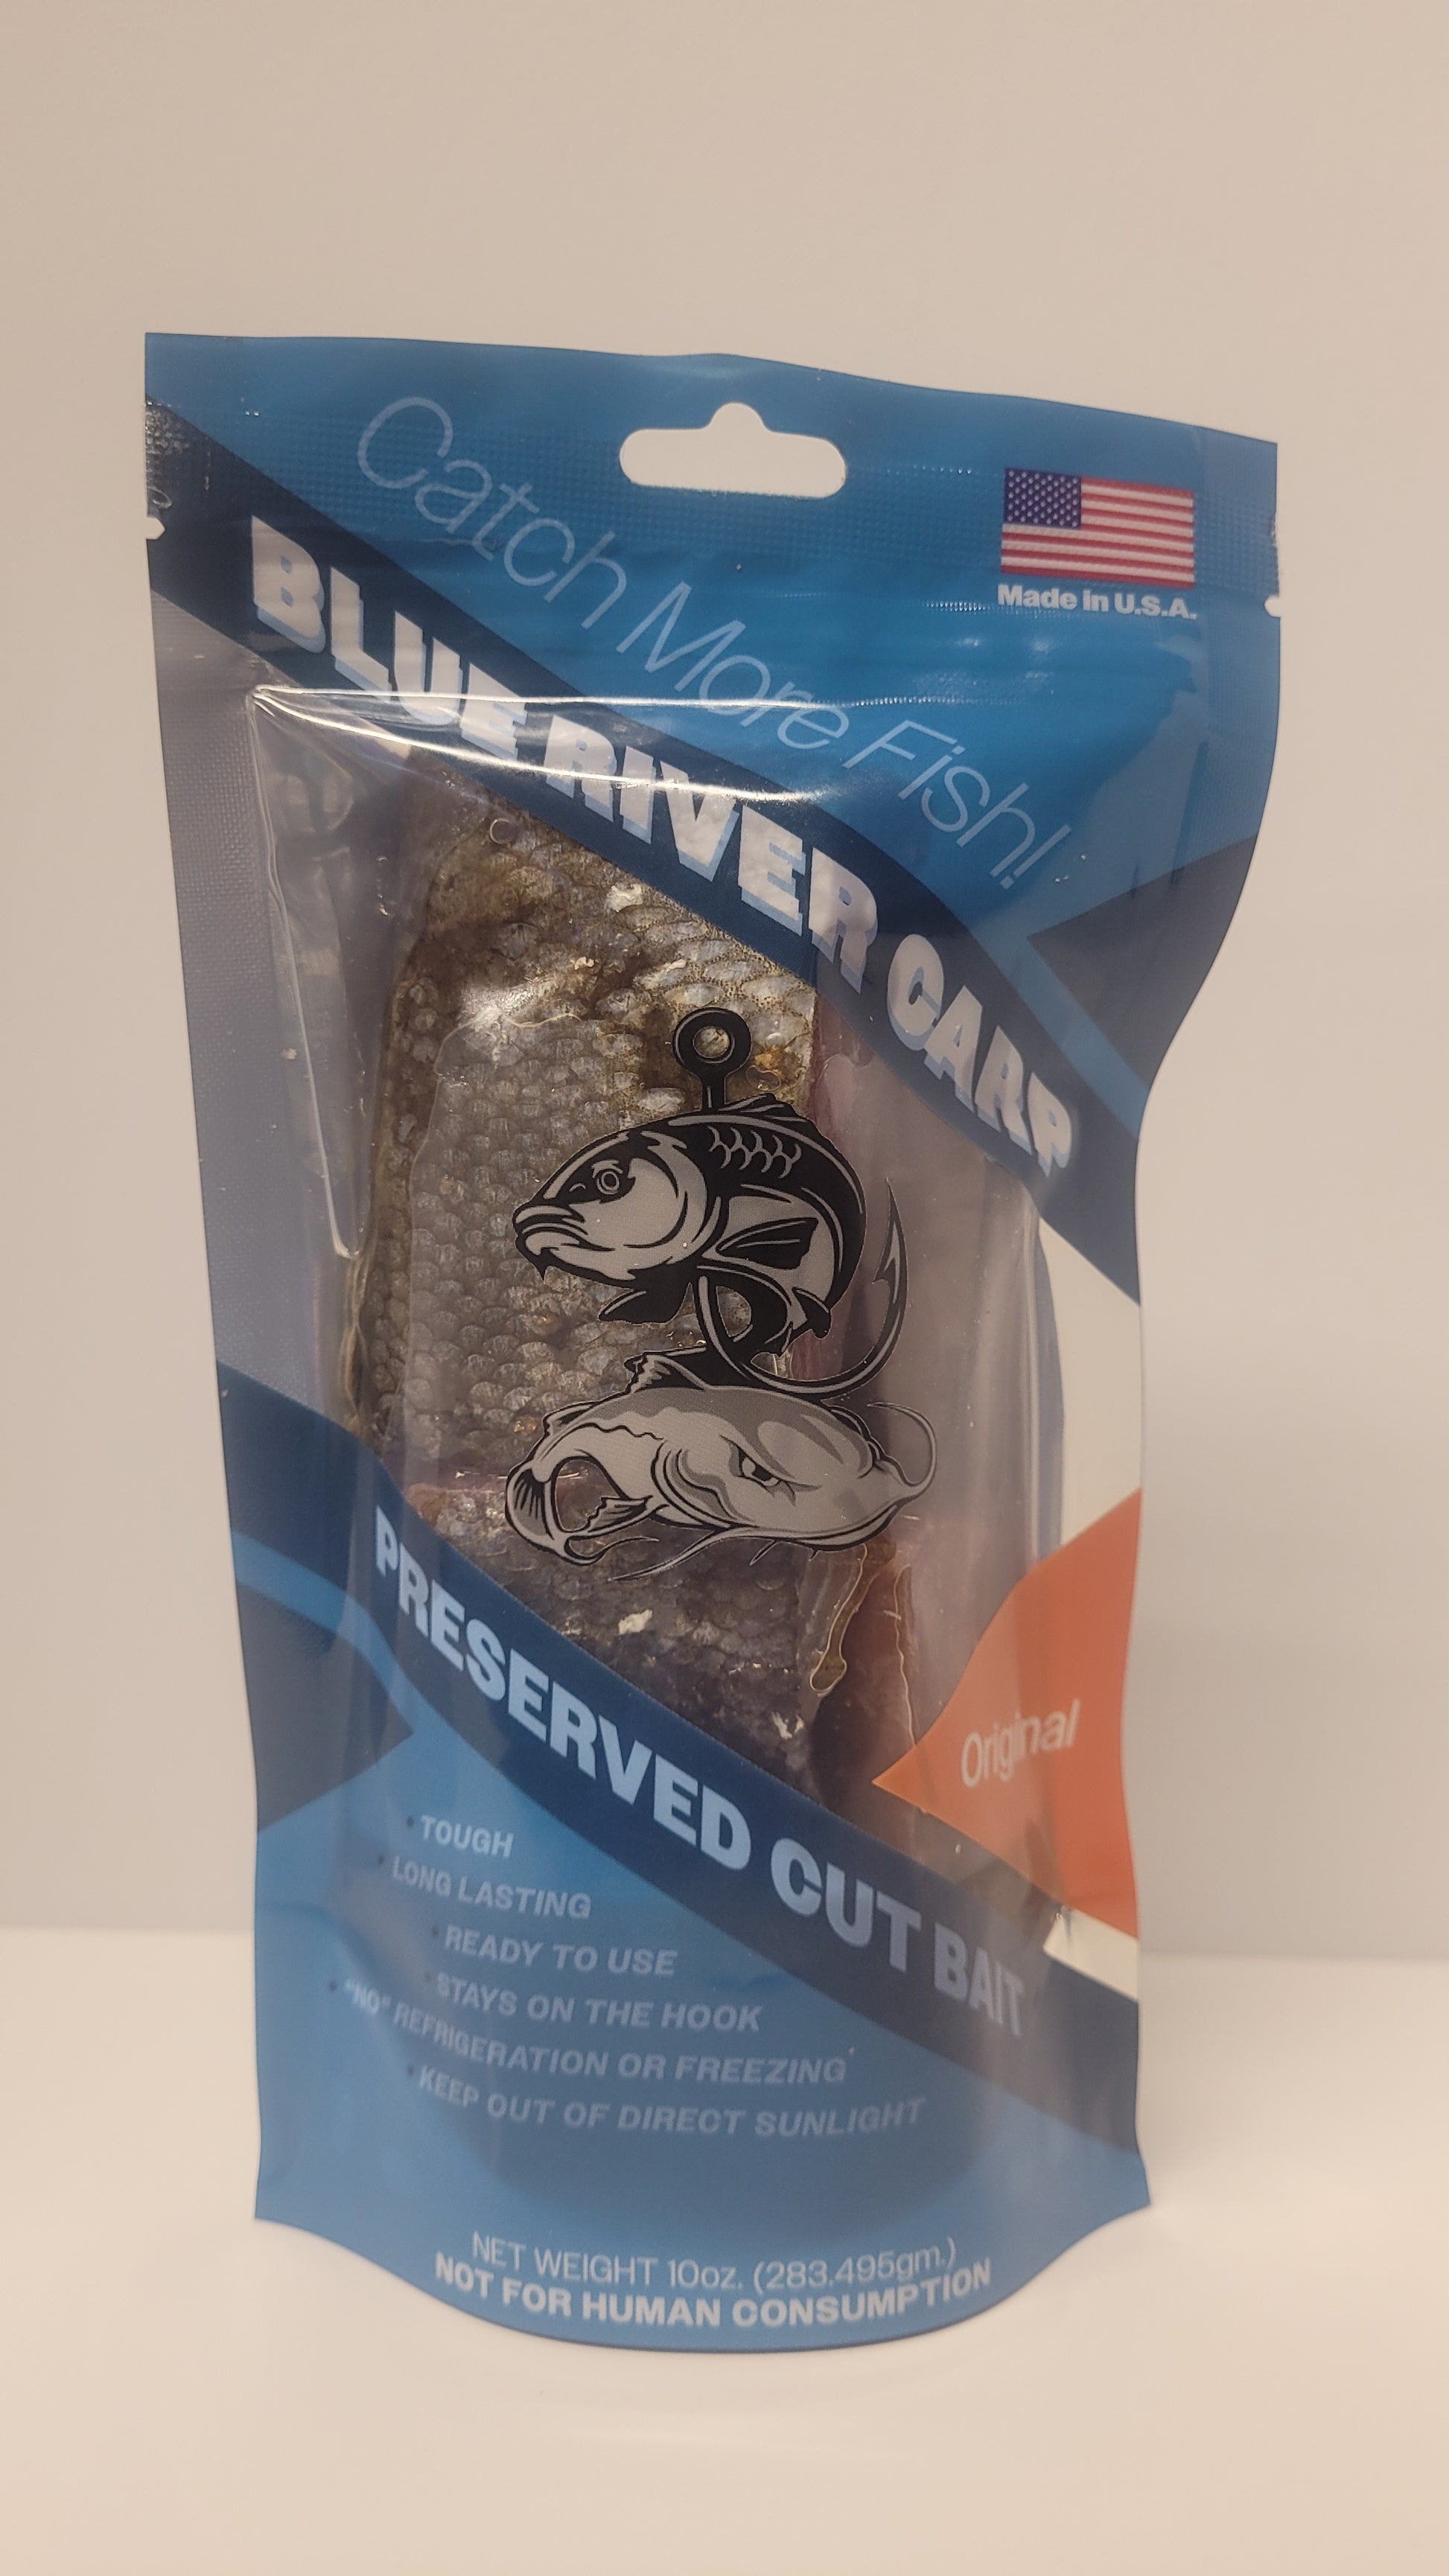 10oz - Chunks - Approx 2w x 3L with approximately 5 pieces of bait – Blue  River Carp, Inc.